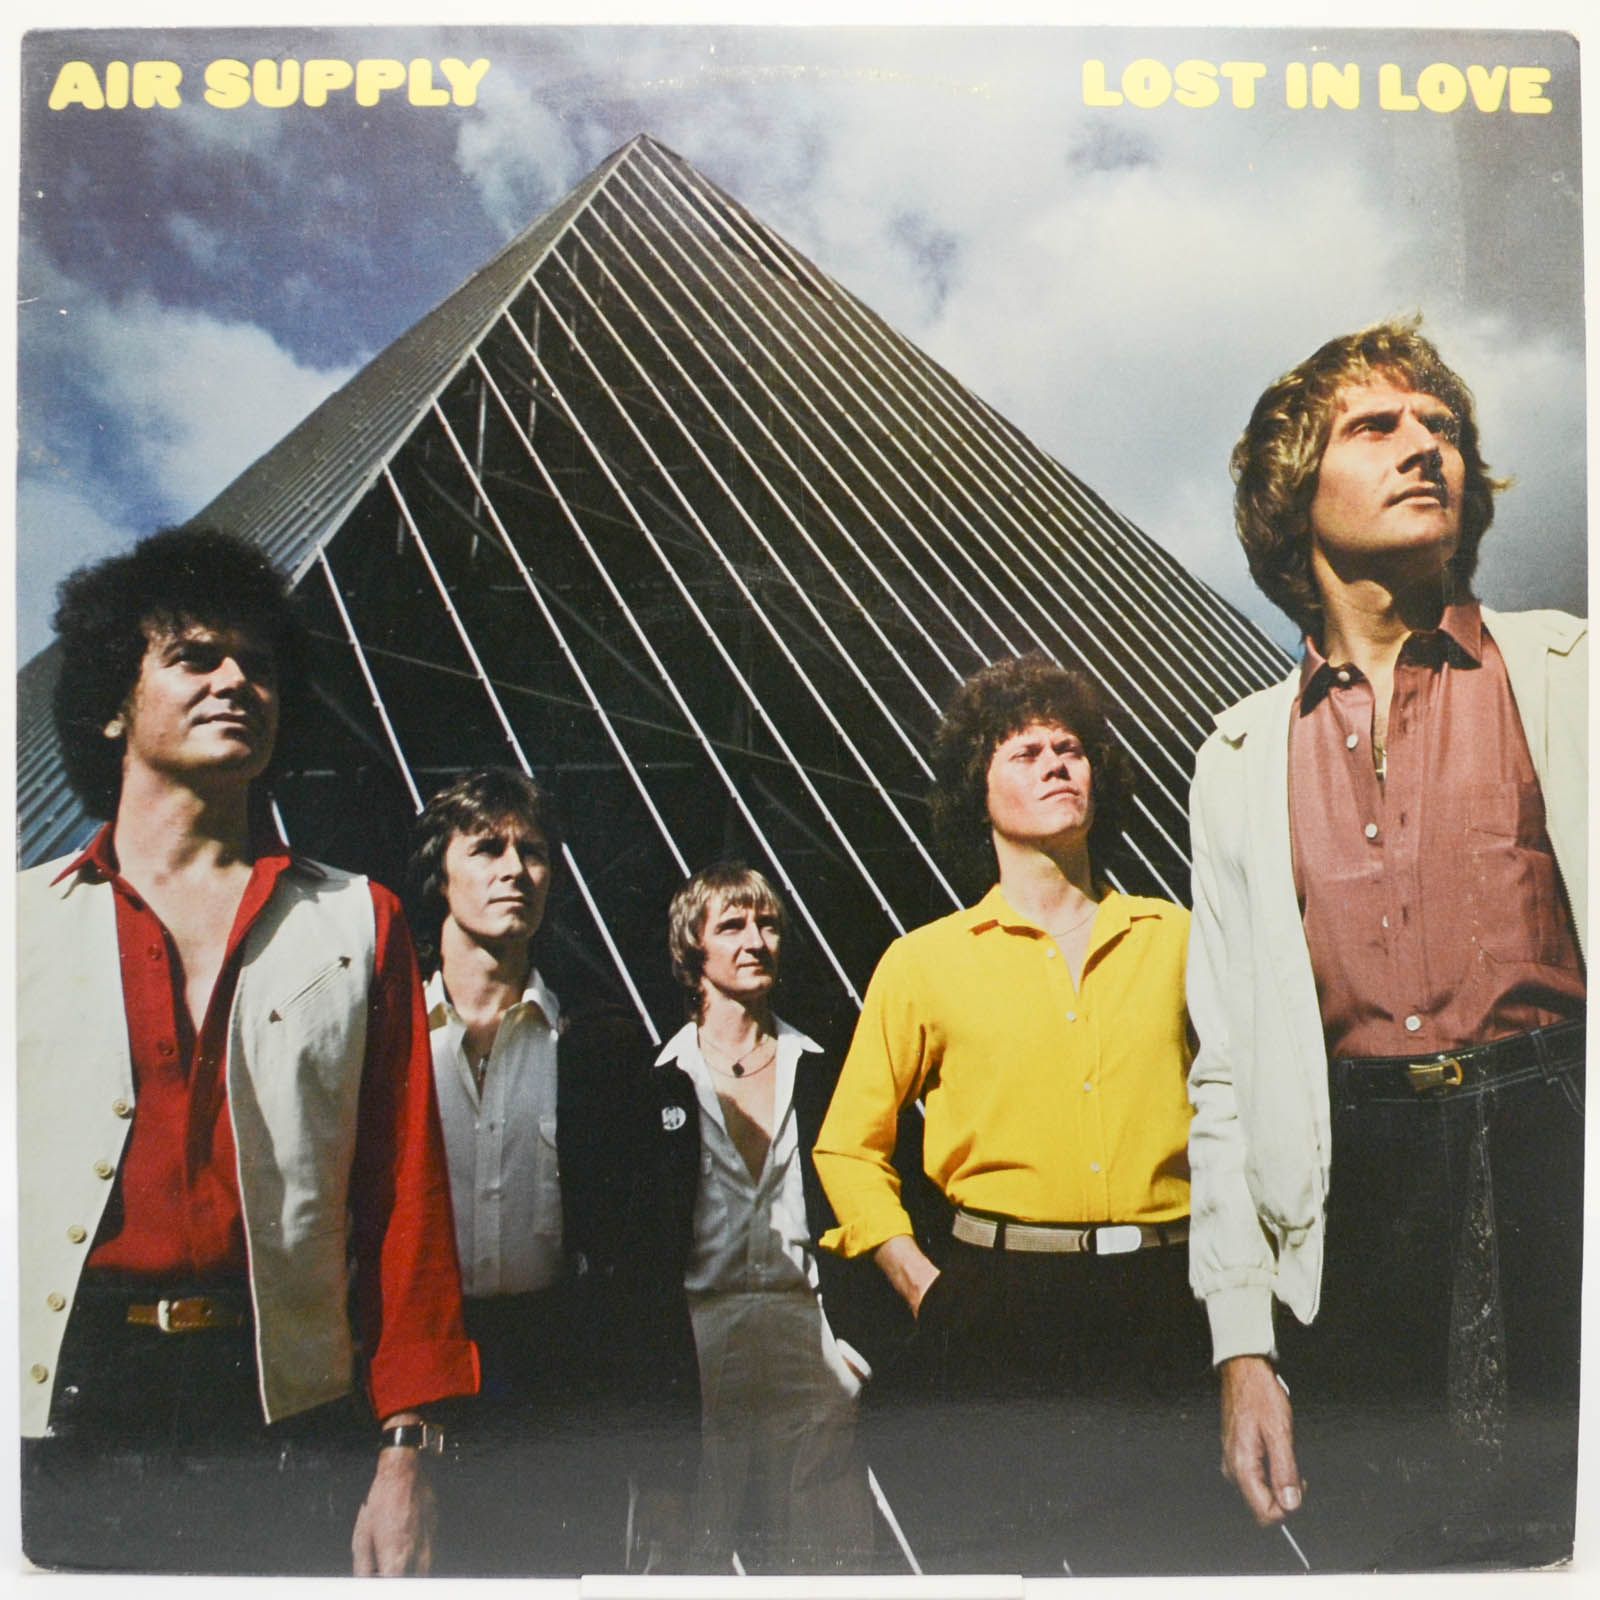 Air Supply — Lost In Love, 1980